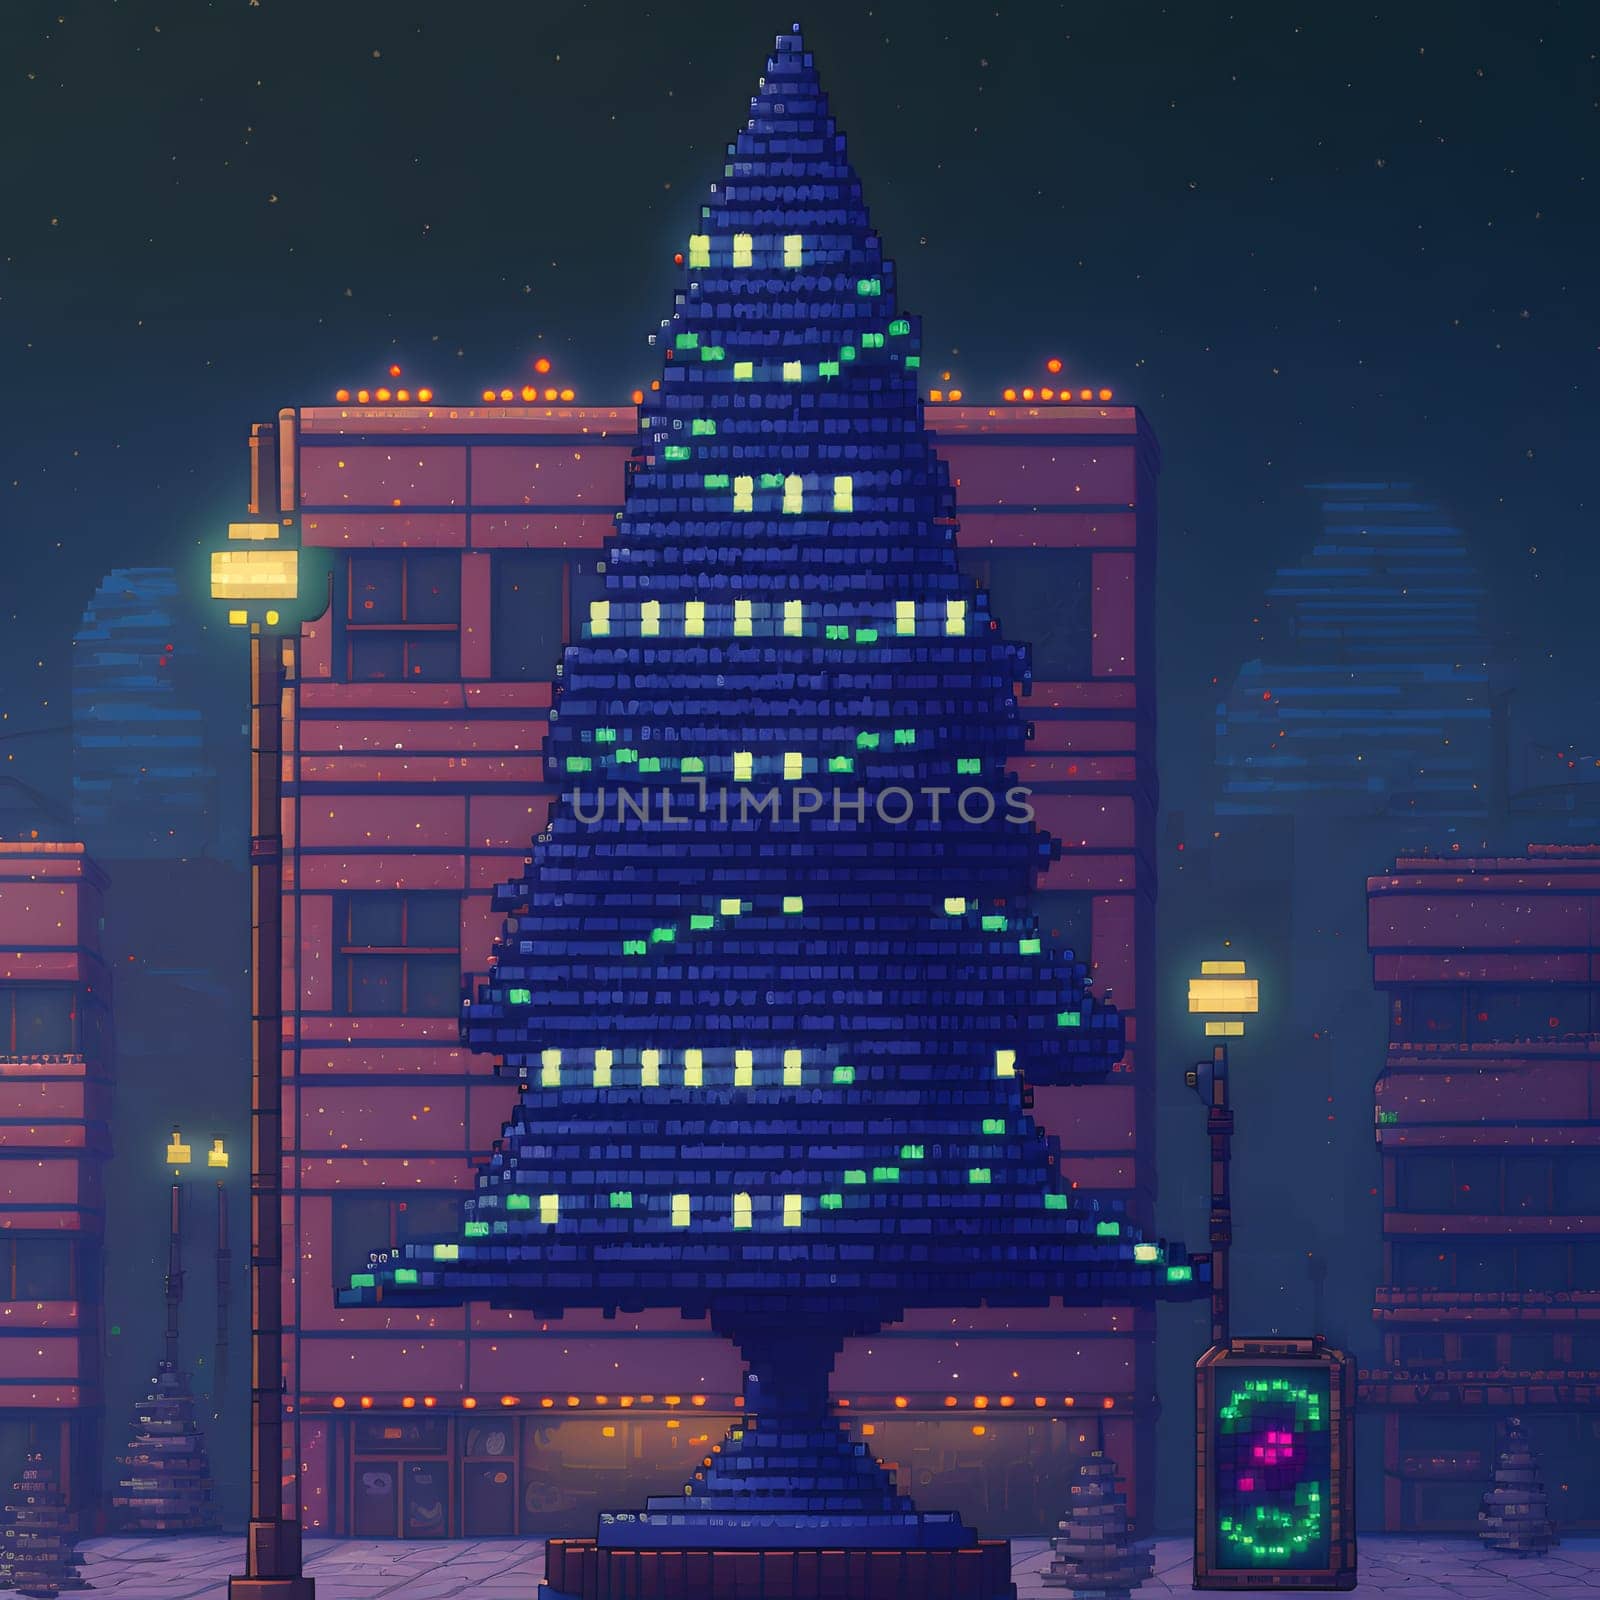 large decorated Christmas tree in city, pixel art, neural network generated. Digitally generated image. Not based on any actual scene or pattern.